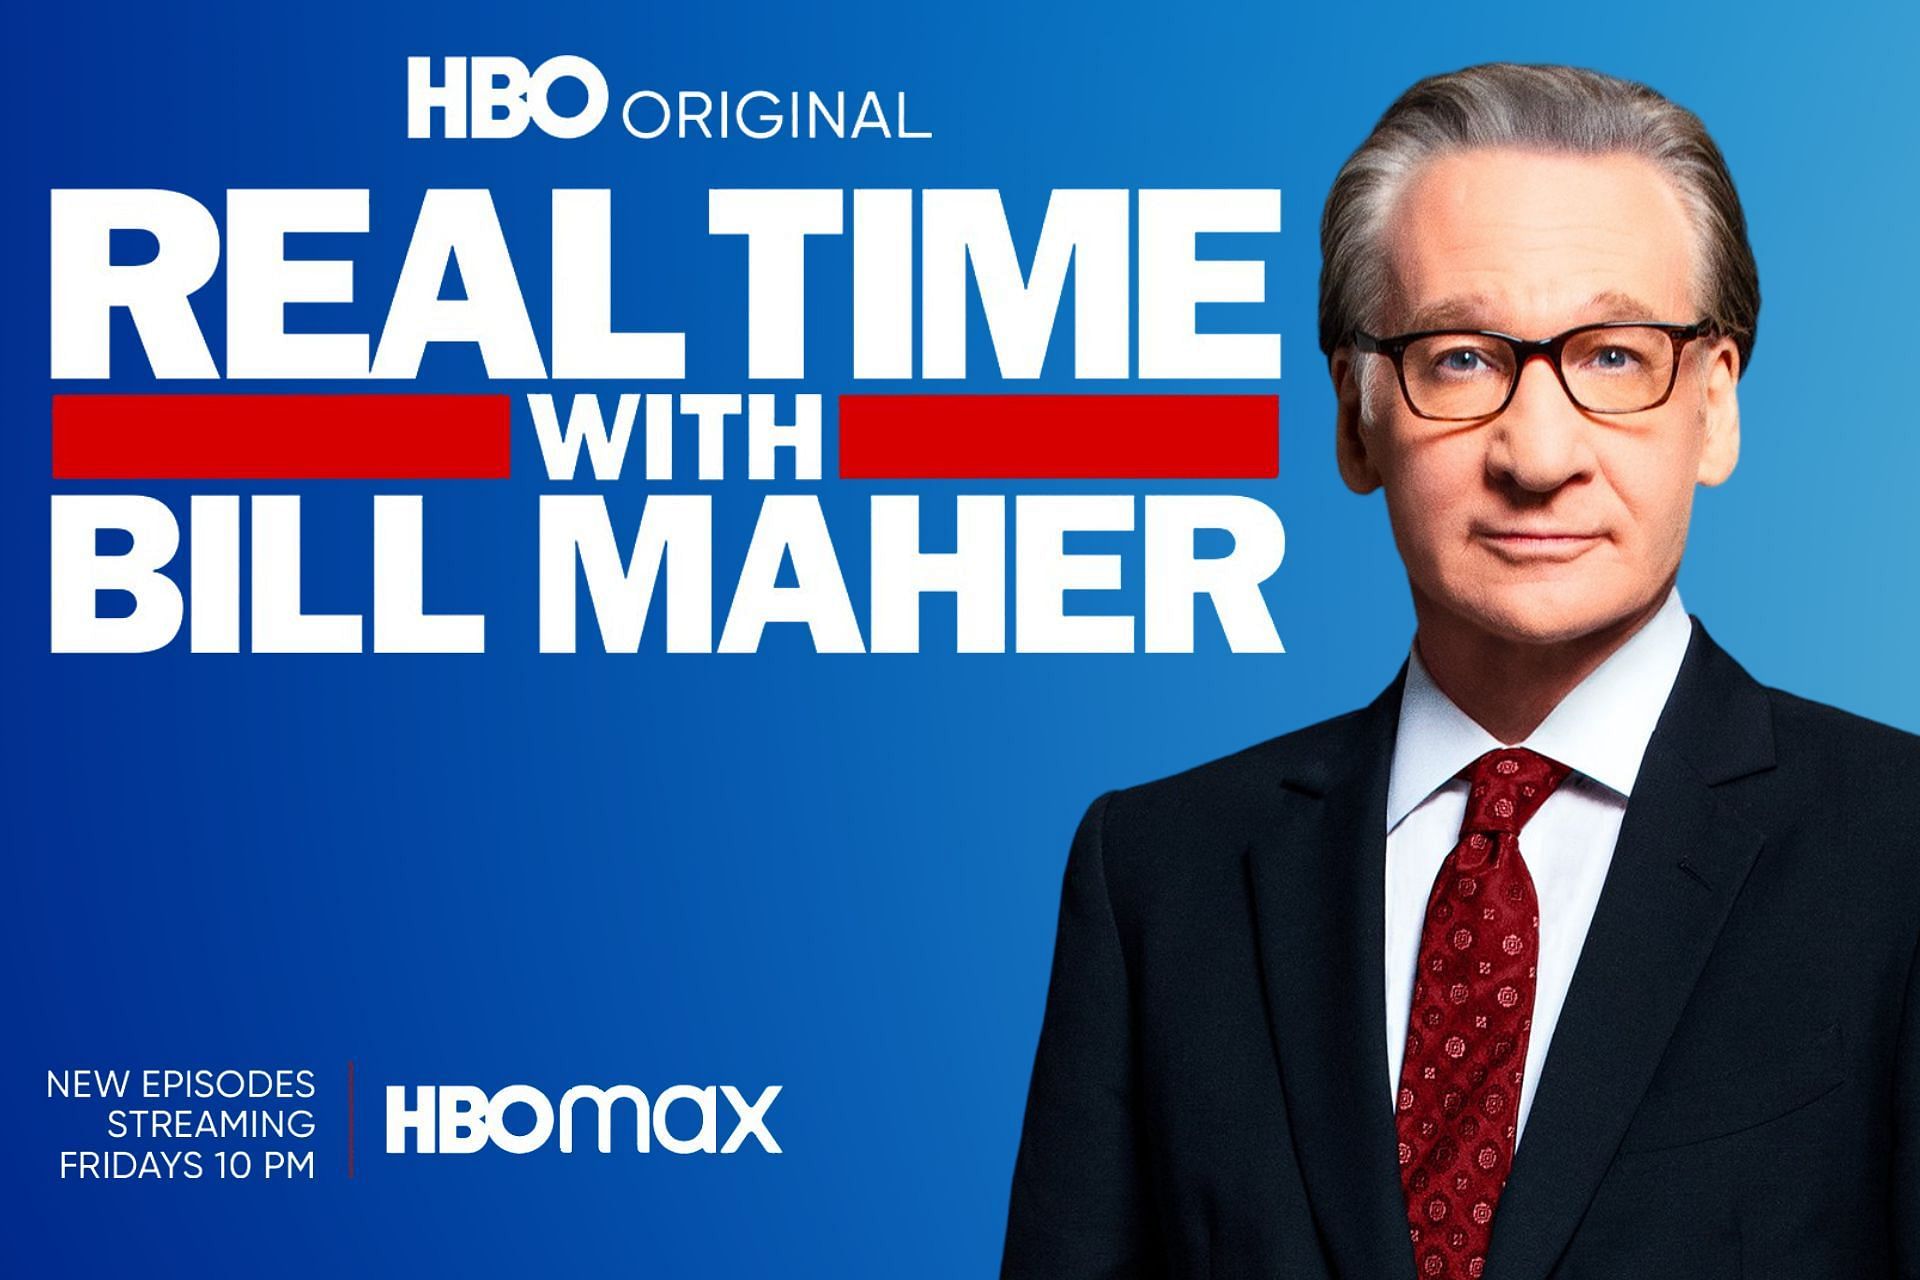 Real Time With Bill Maher episode 3 HBO reveals interesting guest